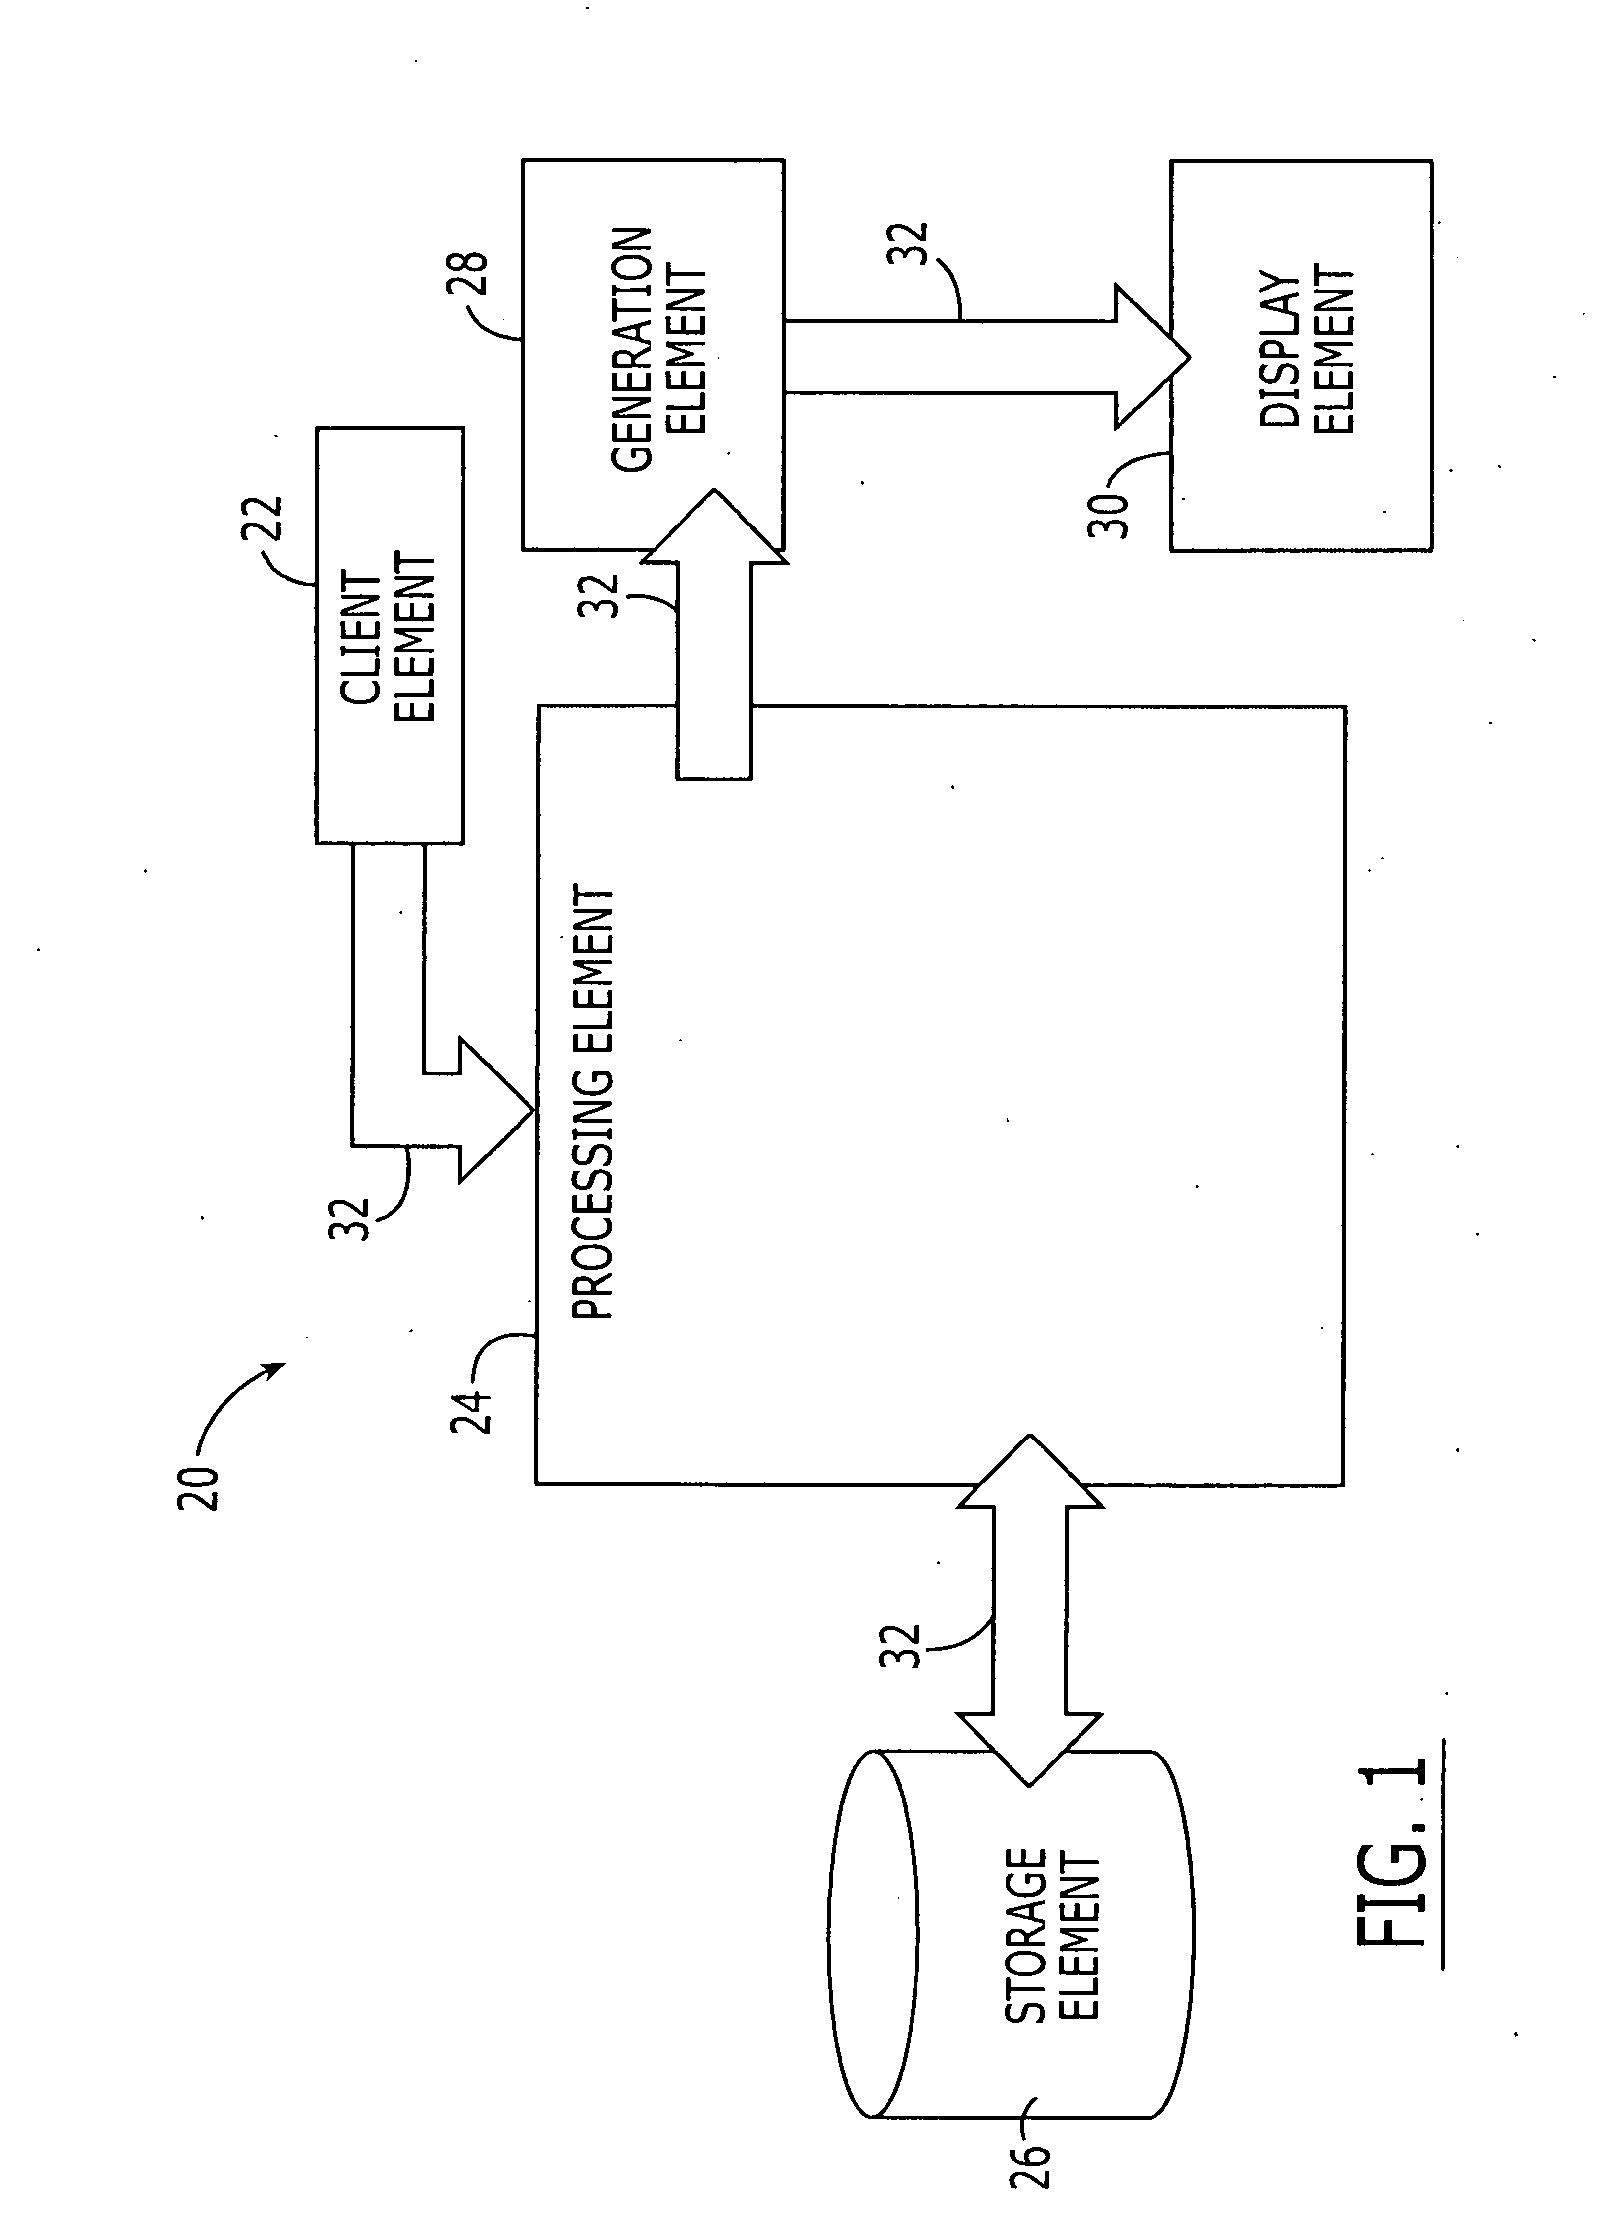 Method, system and computer program product for automatically generating a subset of task-based components from engineering and maintenance data